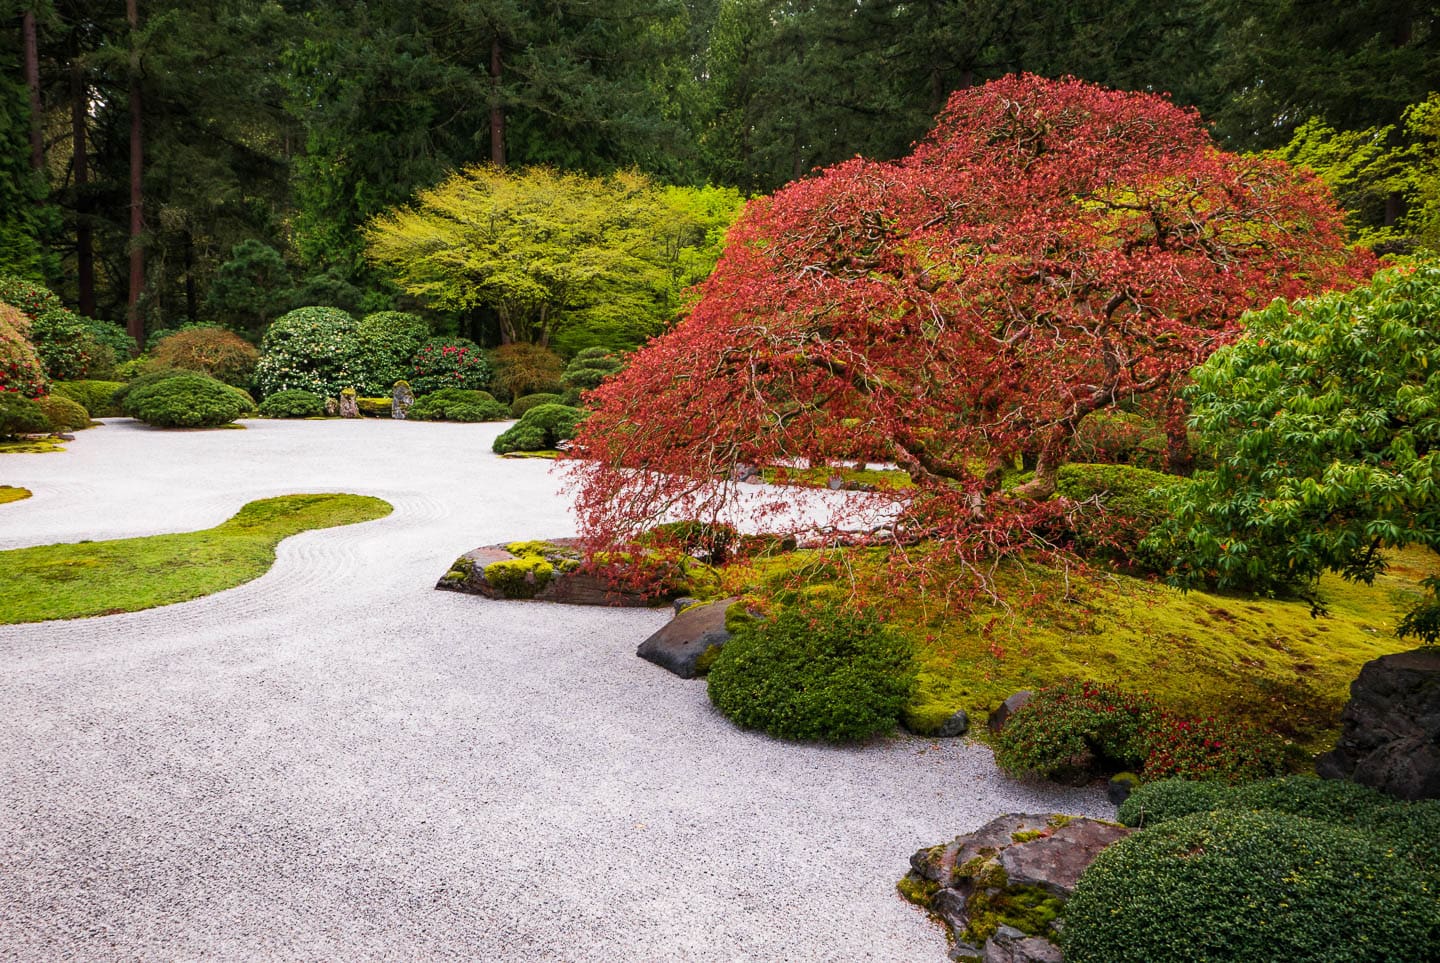 Japanese maple with evergreens around a dry river bed